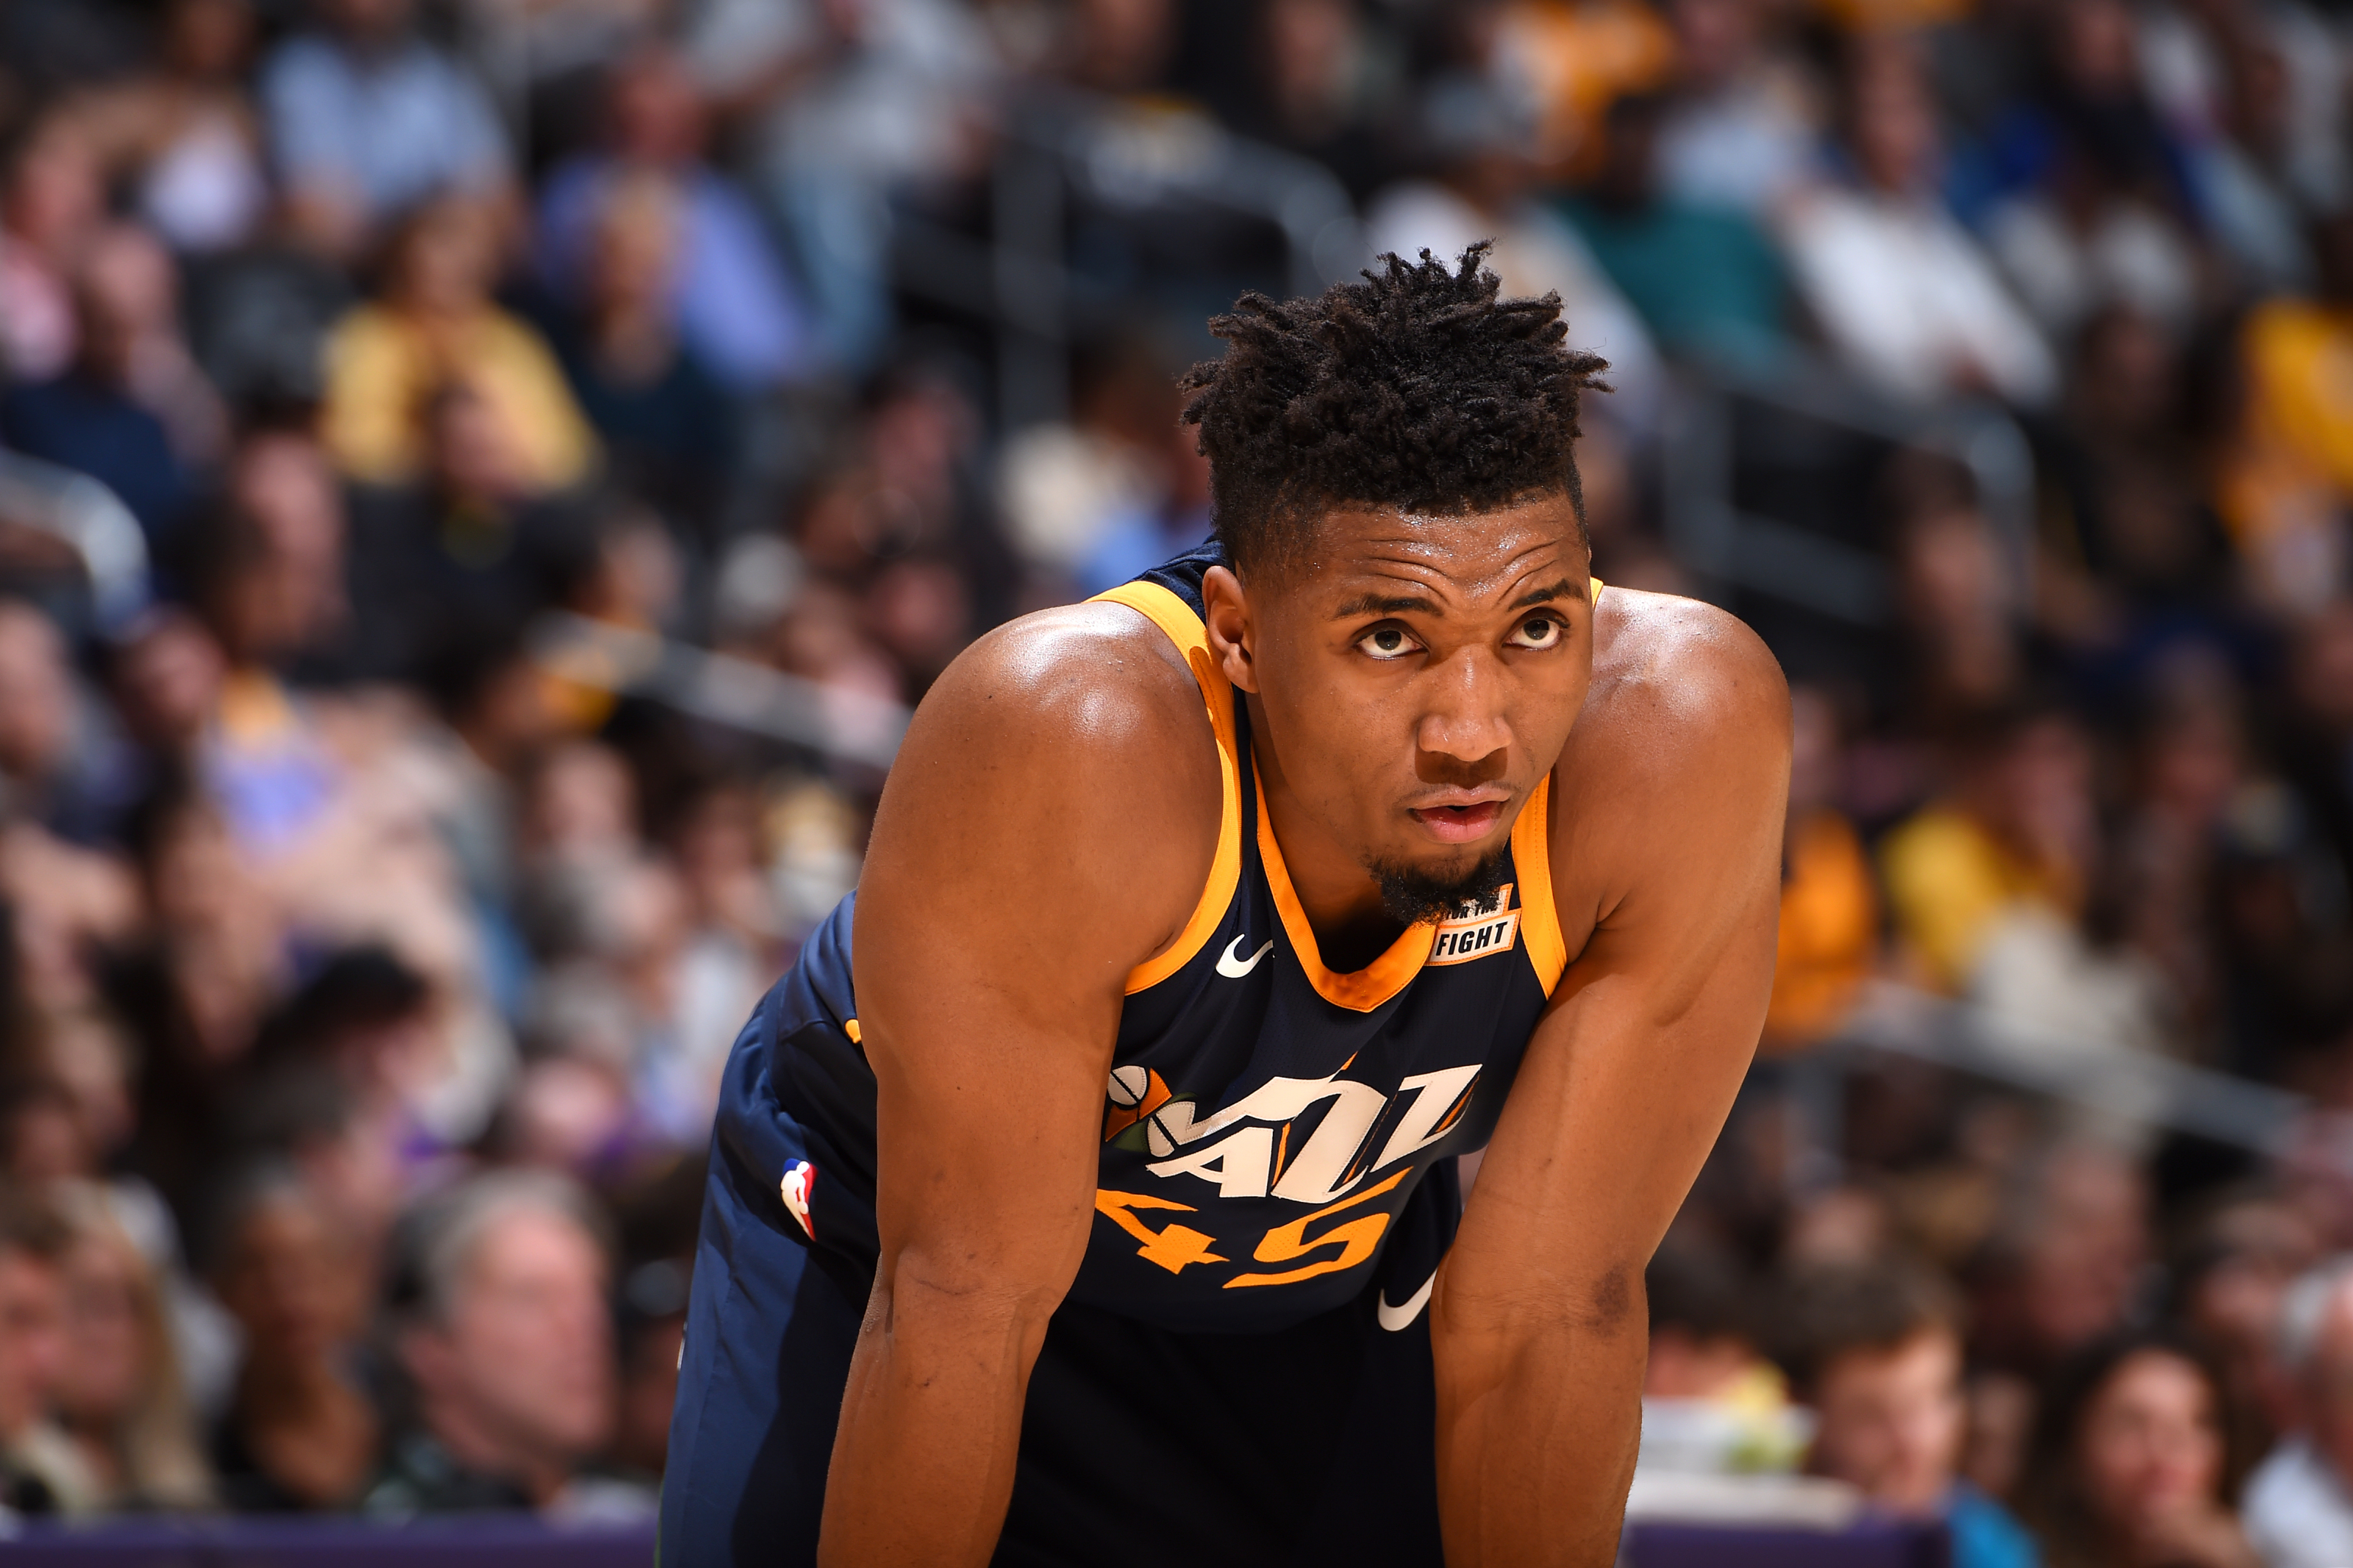 Donovan Mitchell continues to make NBA rookie history